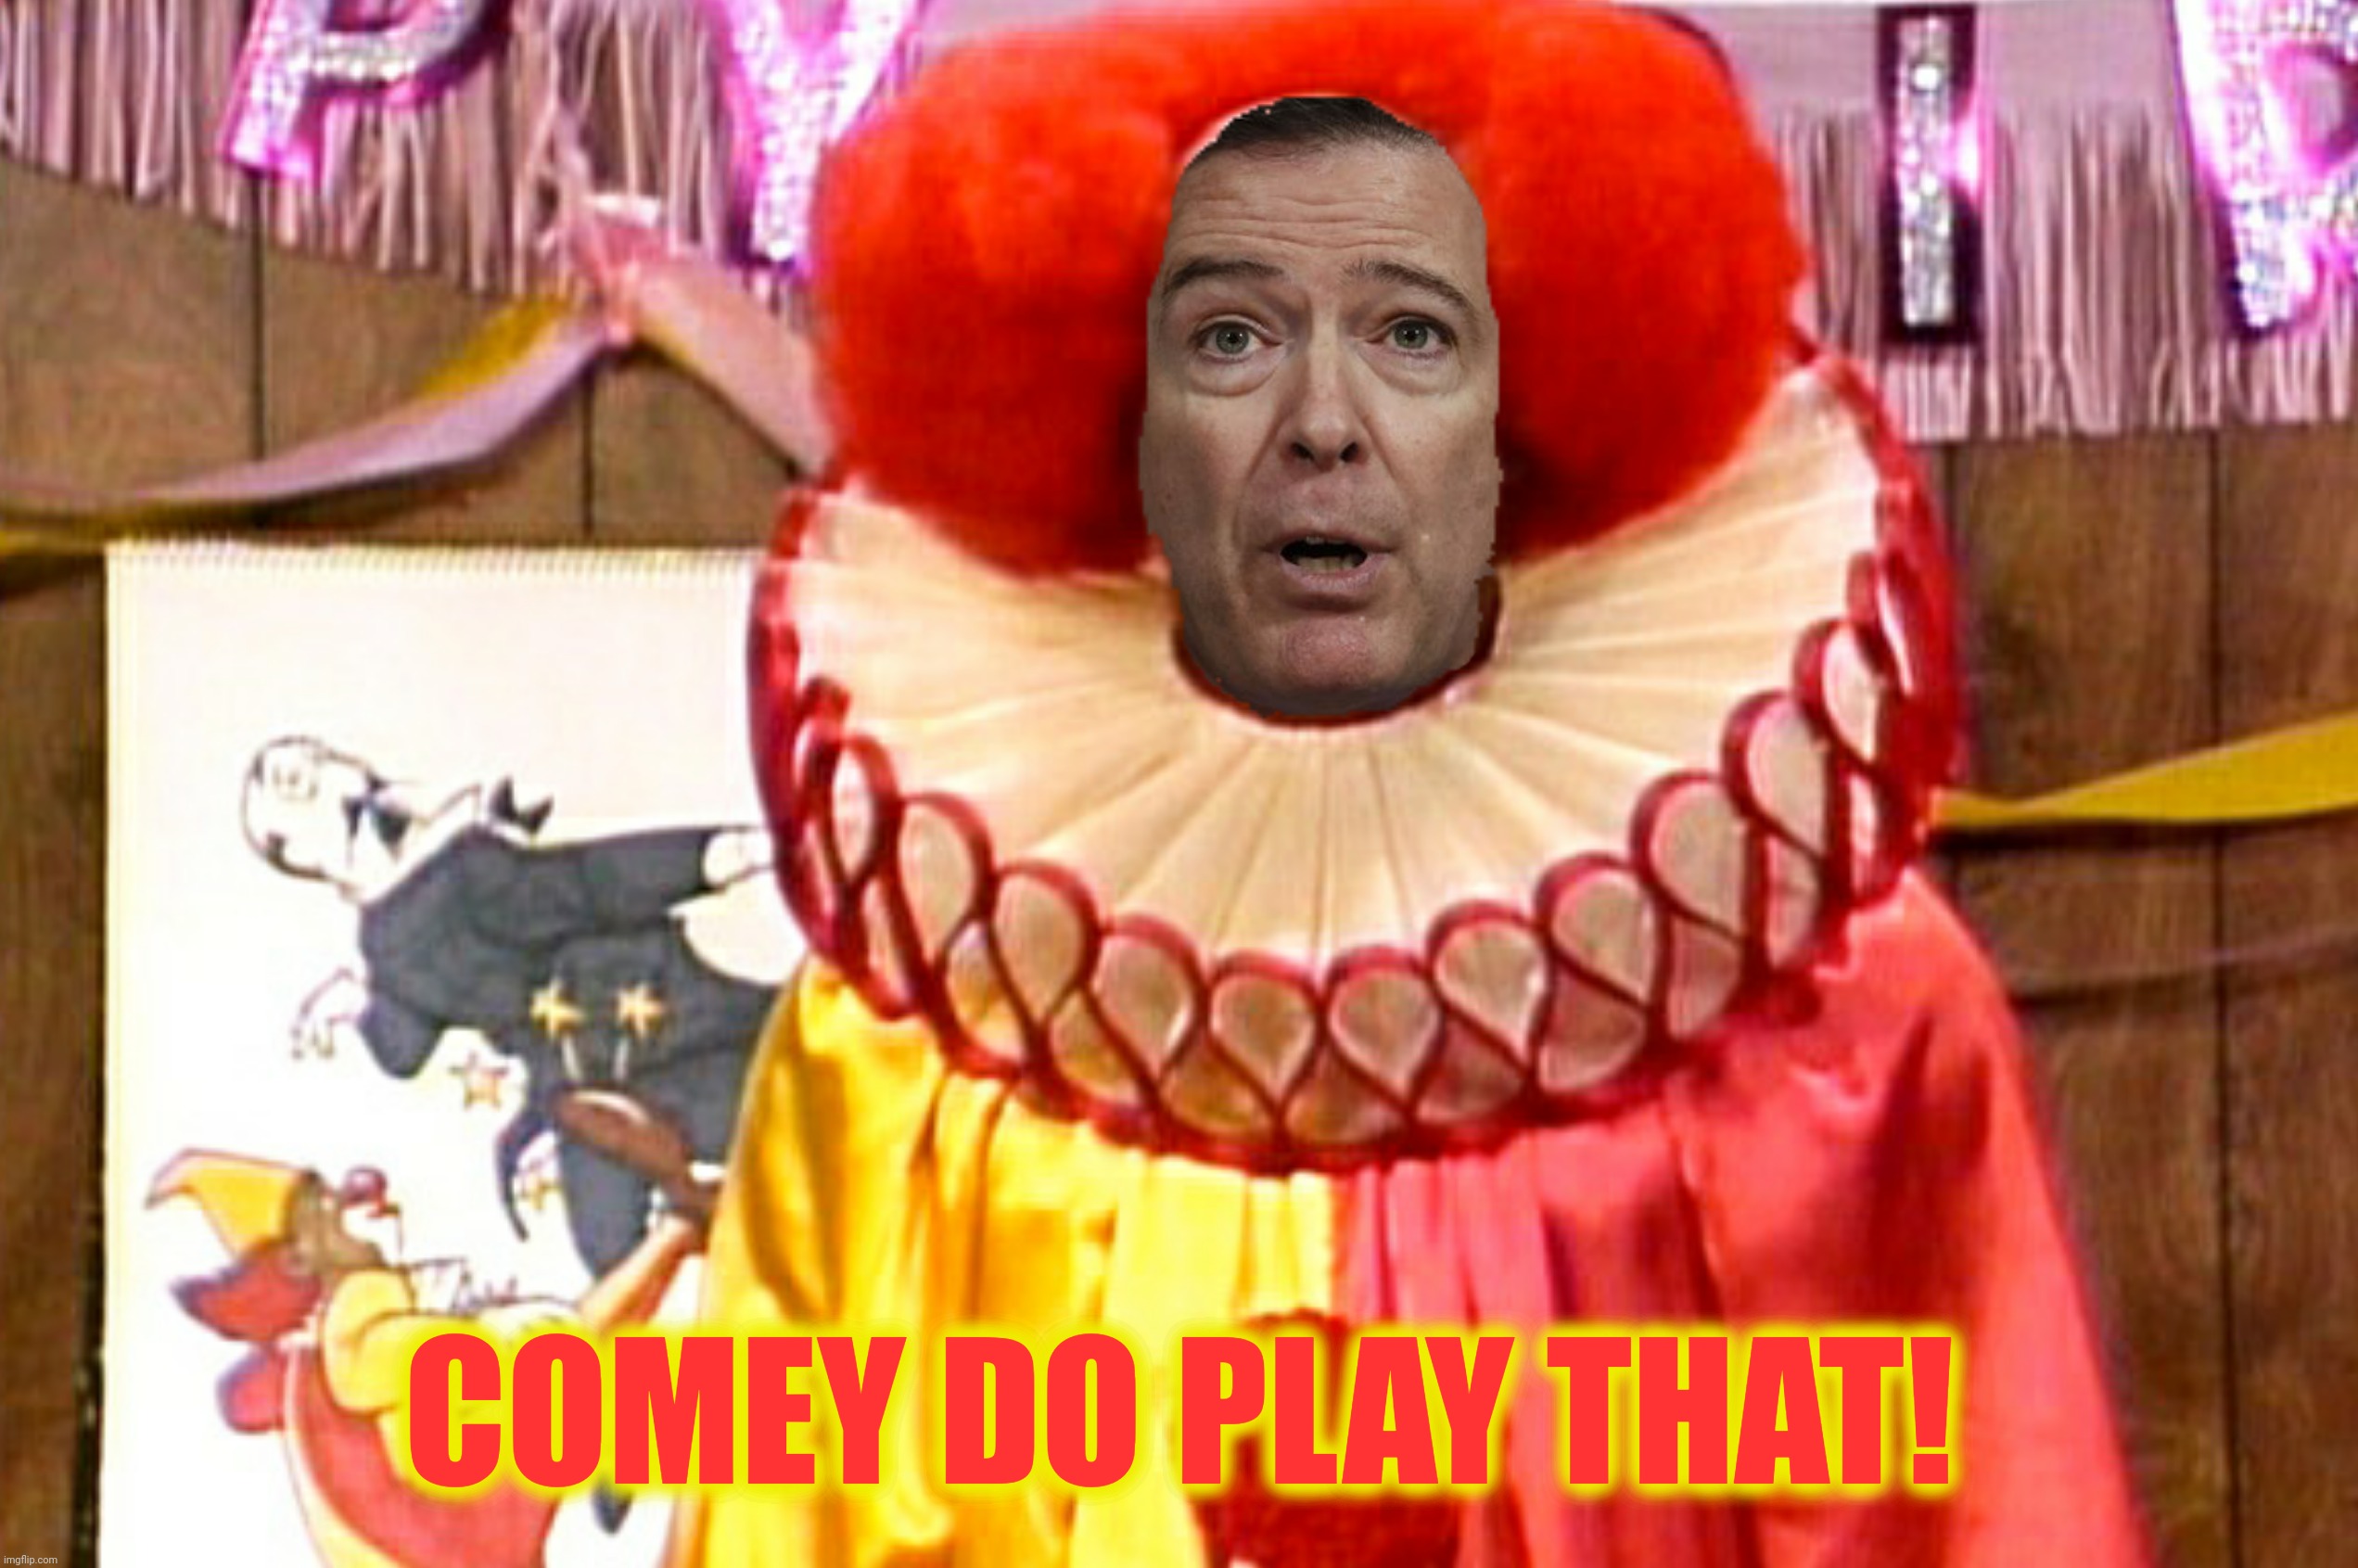 COMEY DO PLAY THAT! | made w/ Imgflip meme maker